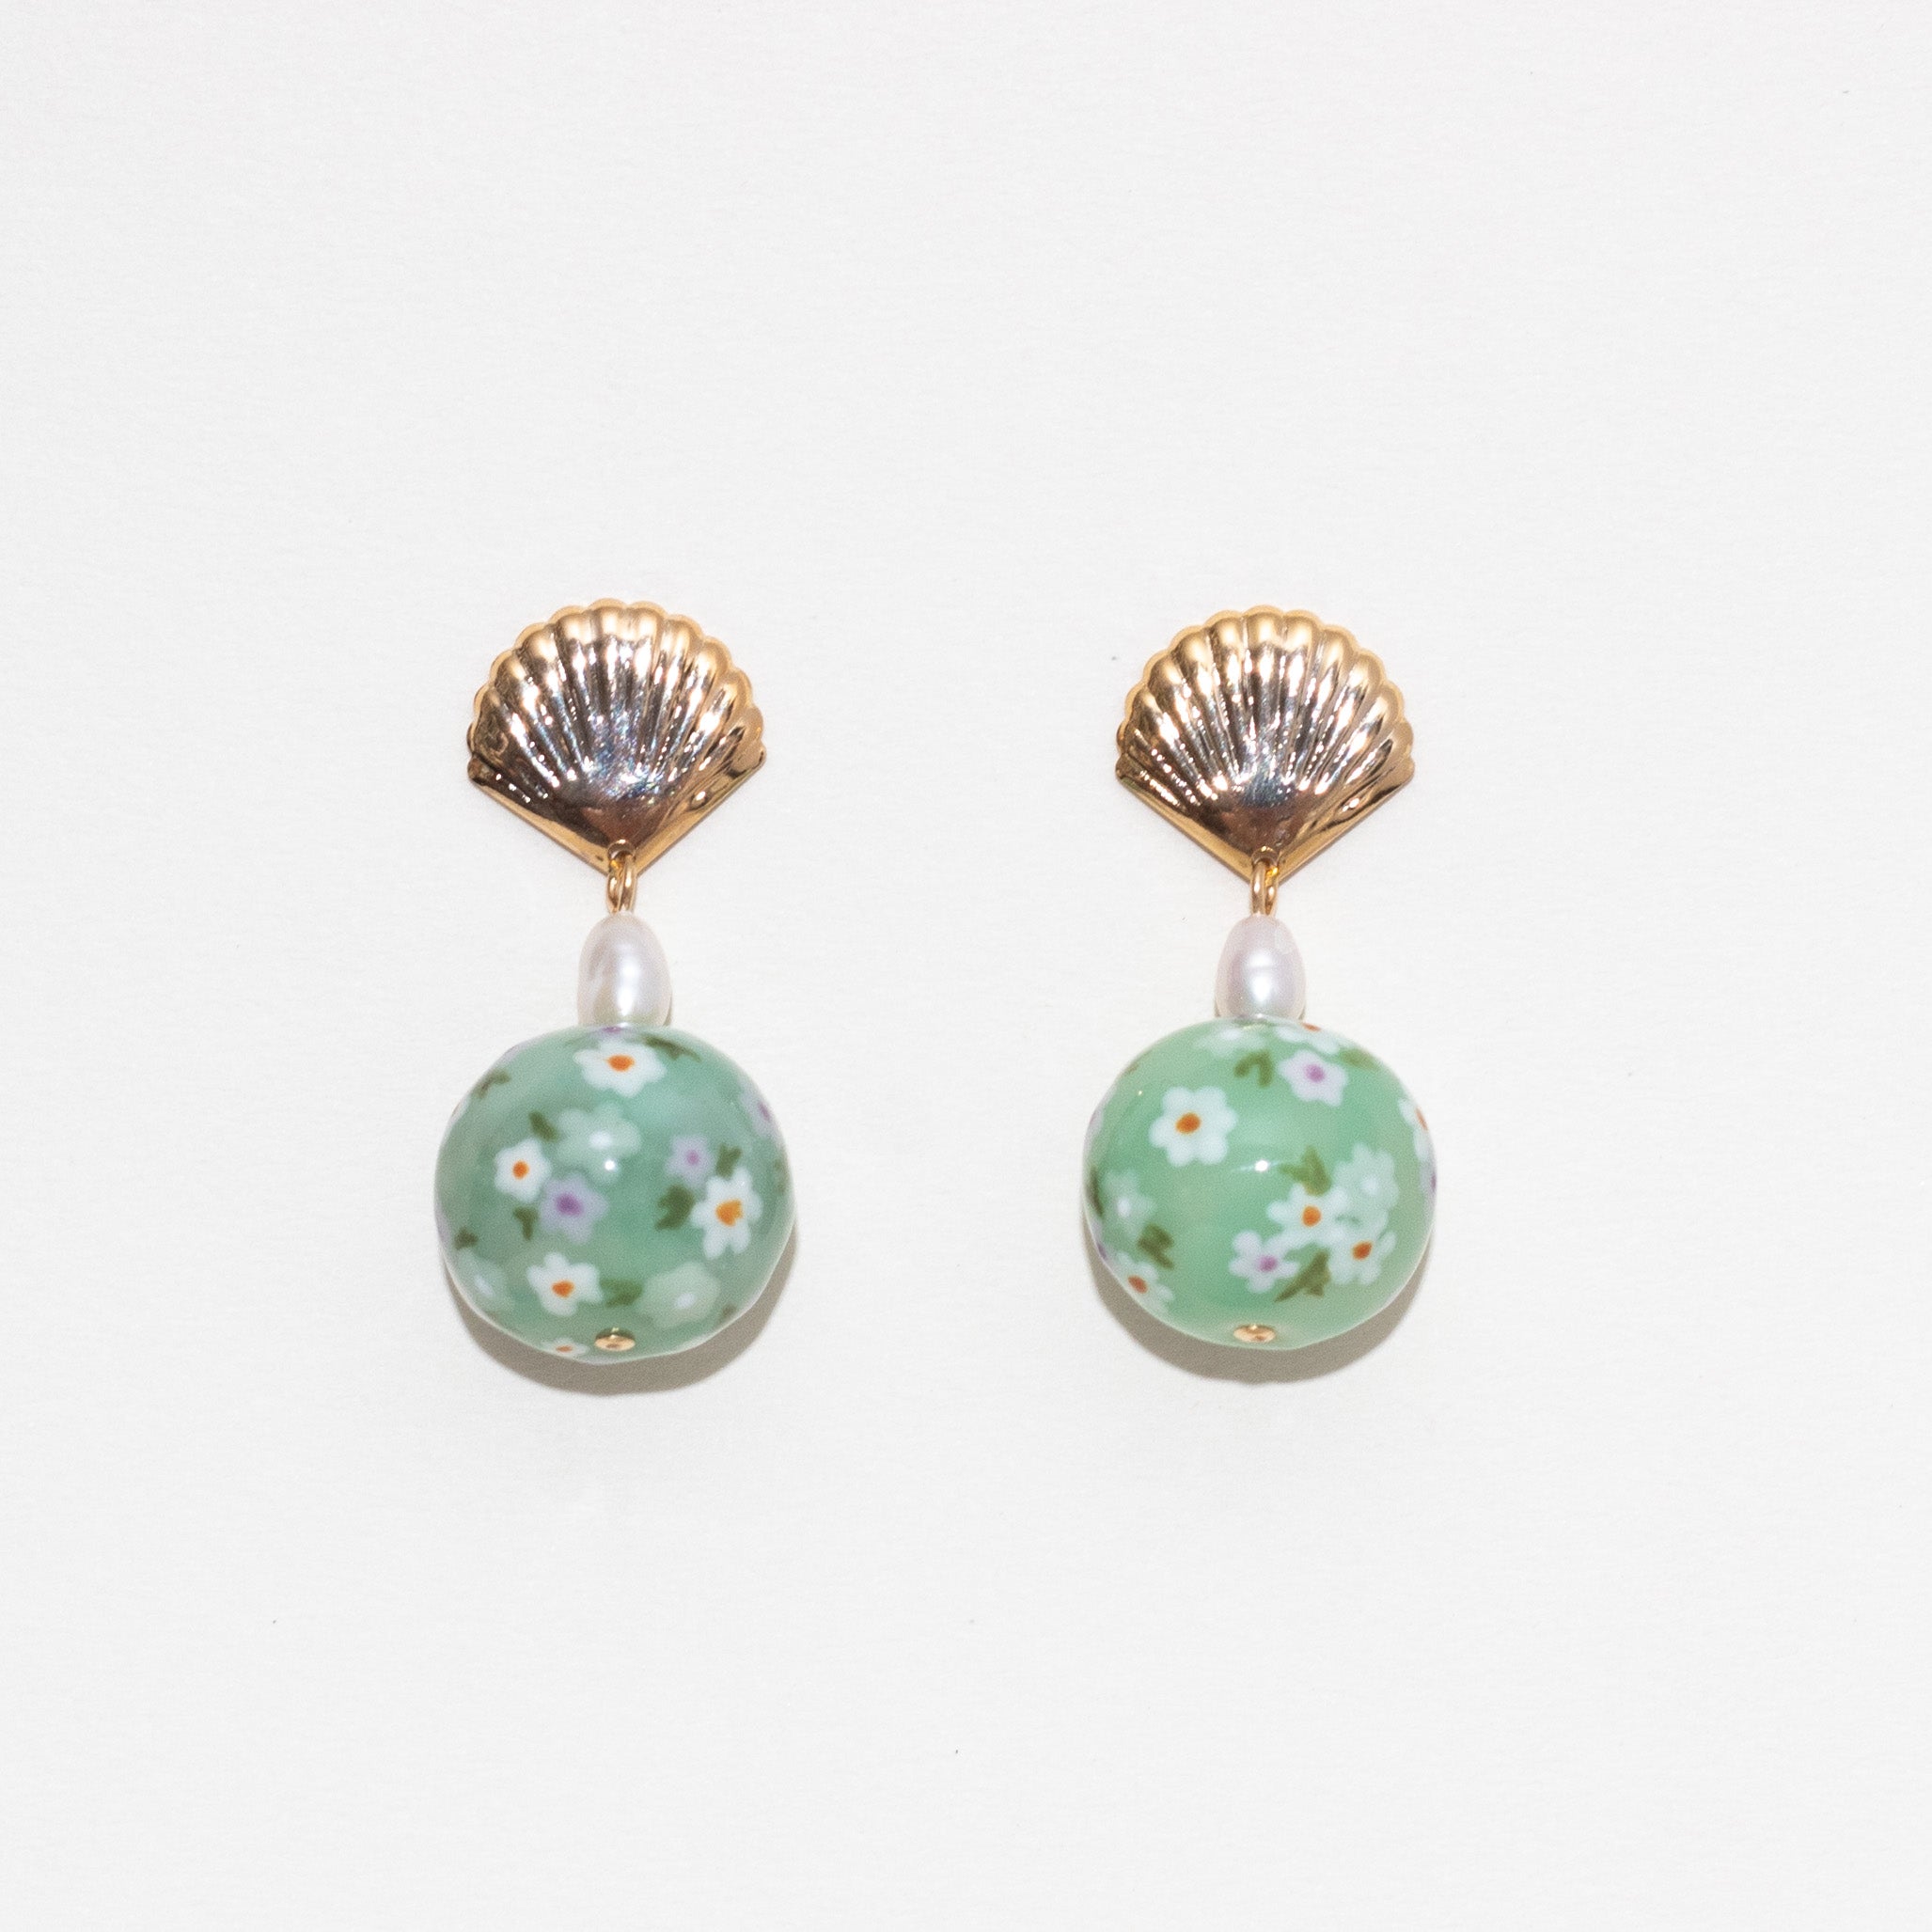 The Bauble Earrings in Ditsy Floral